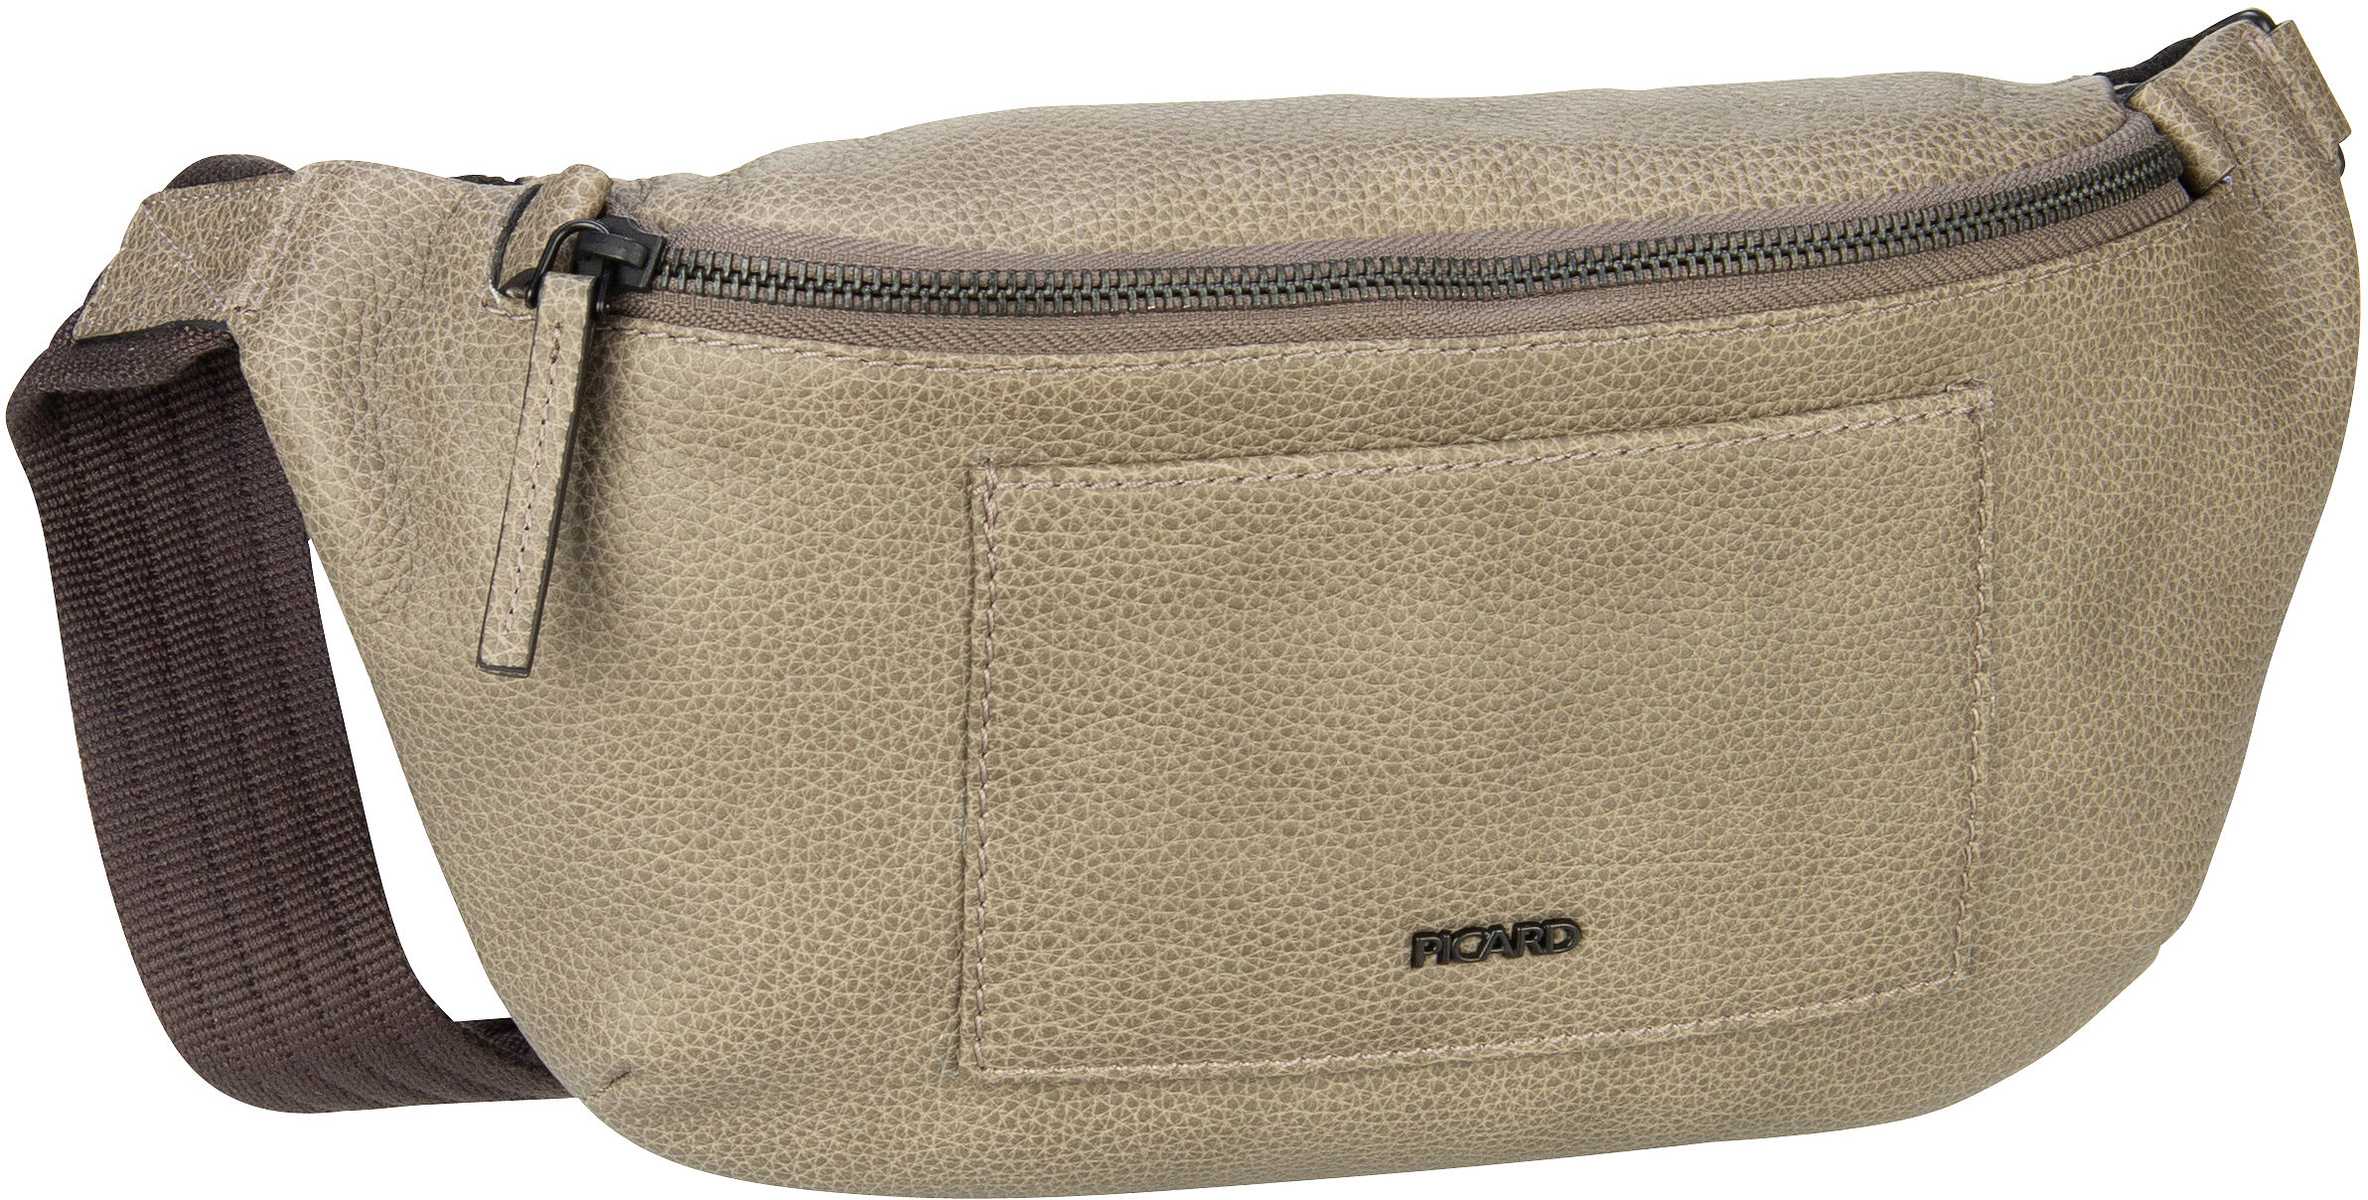 Picard Casual 5475  in Taupe (2.7 Liter), Sling Bag